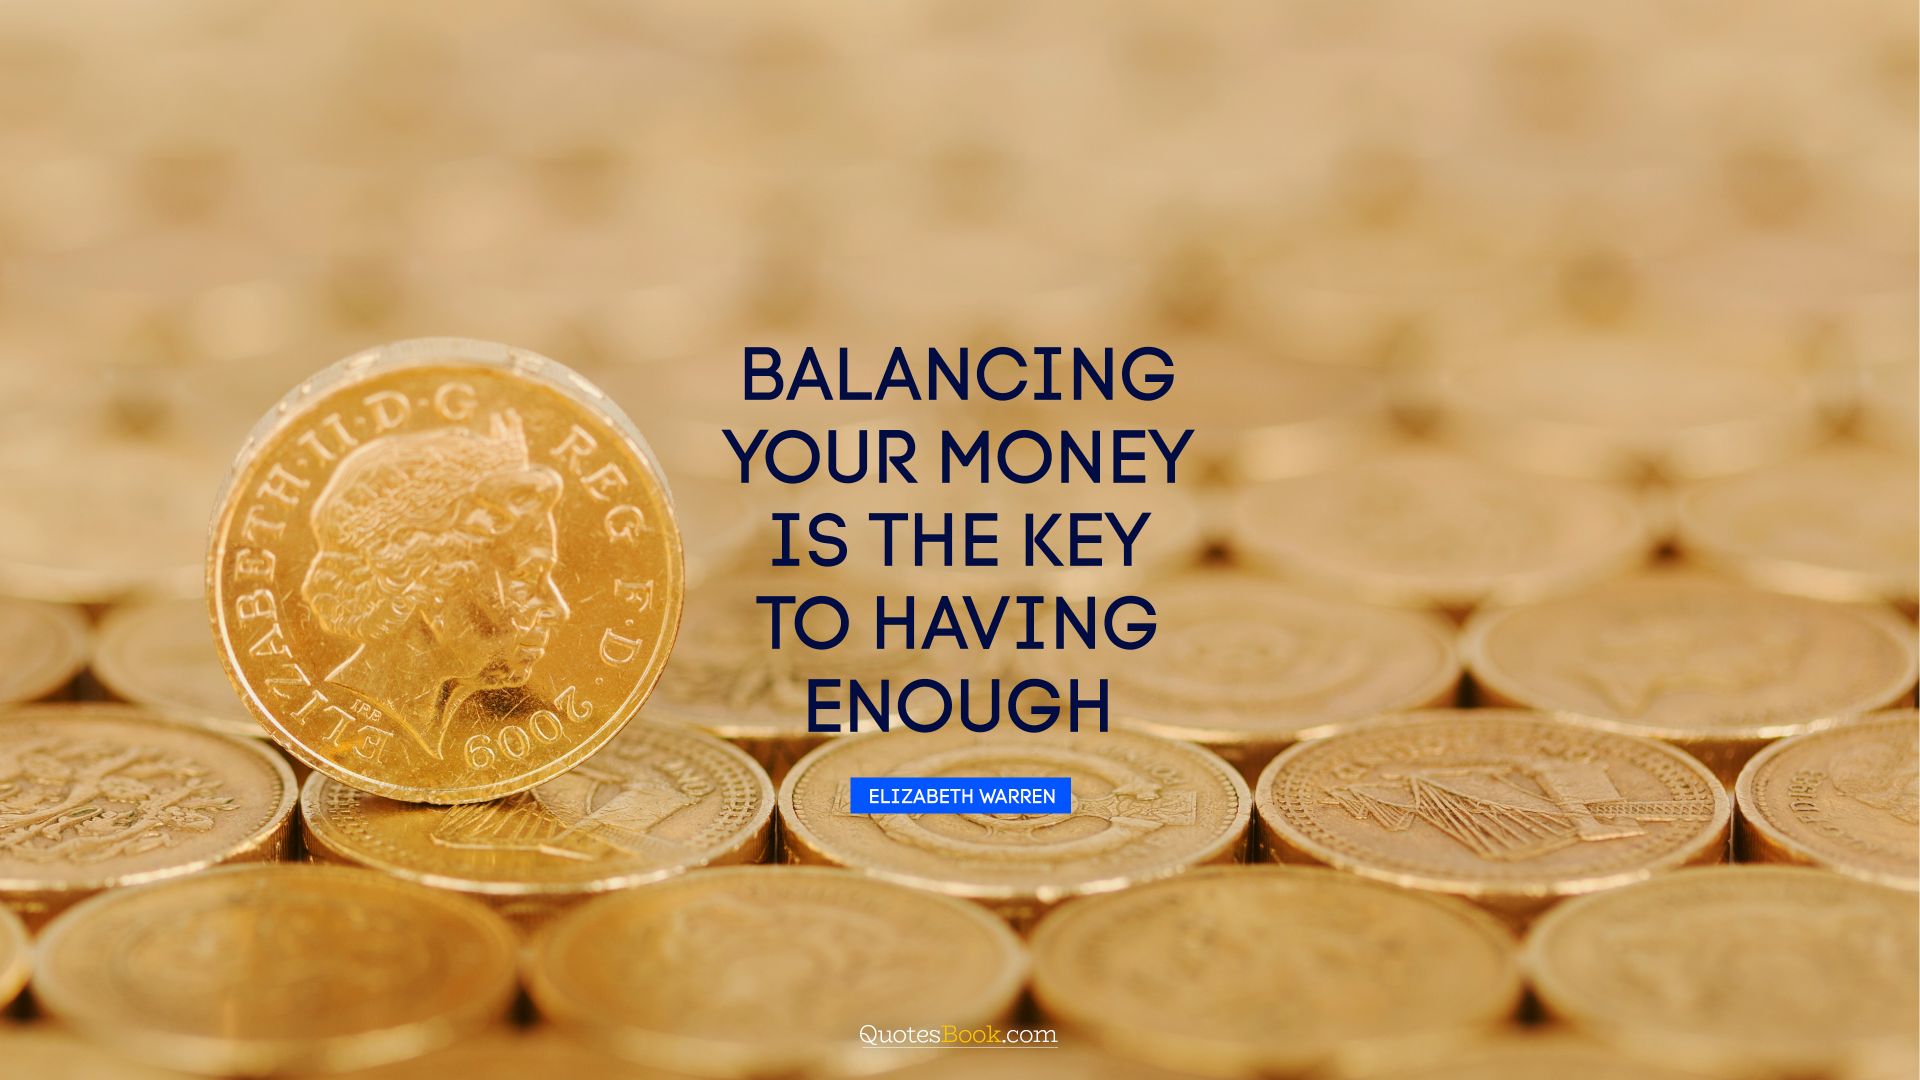 Balancing your money is the key to having enough. - Quote by Elizabeth Warren